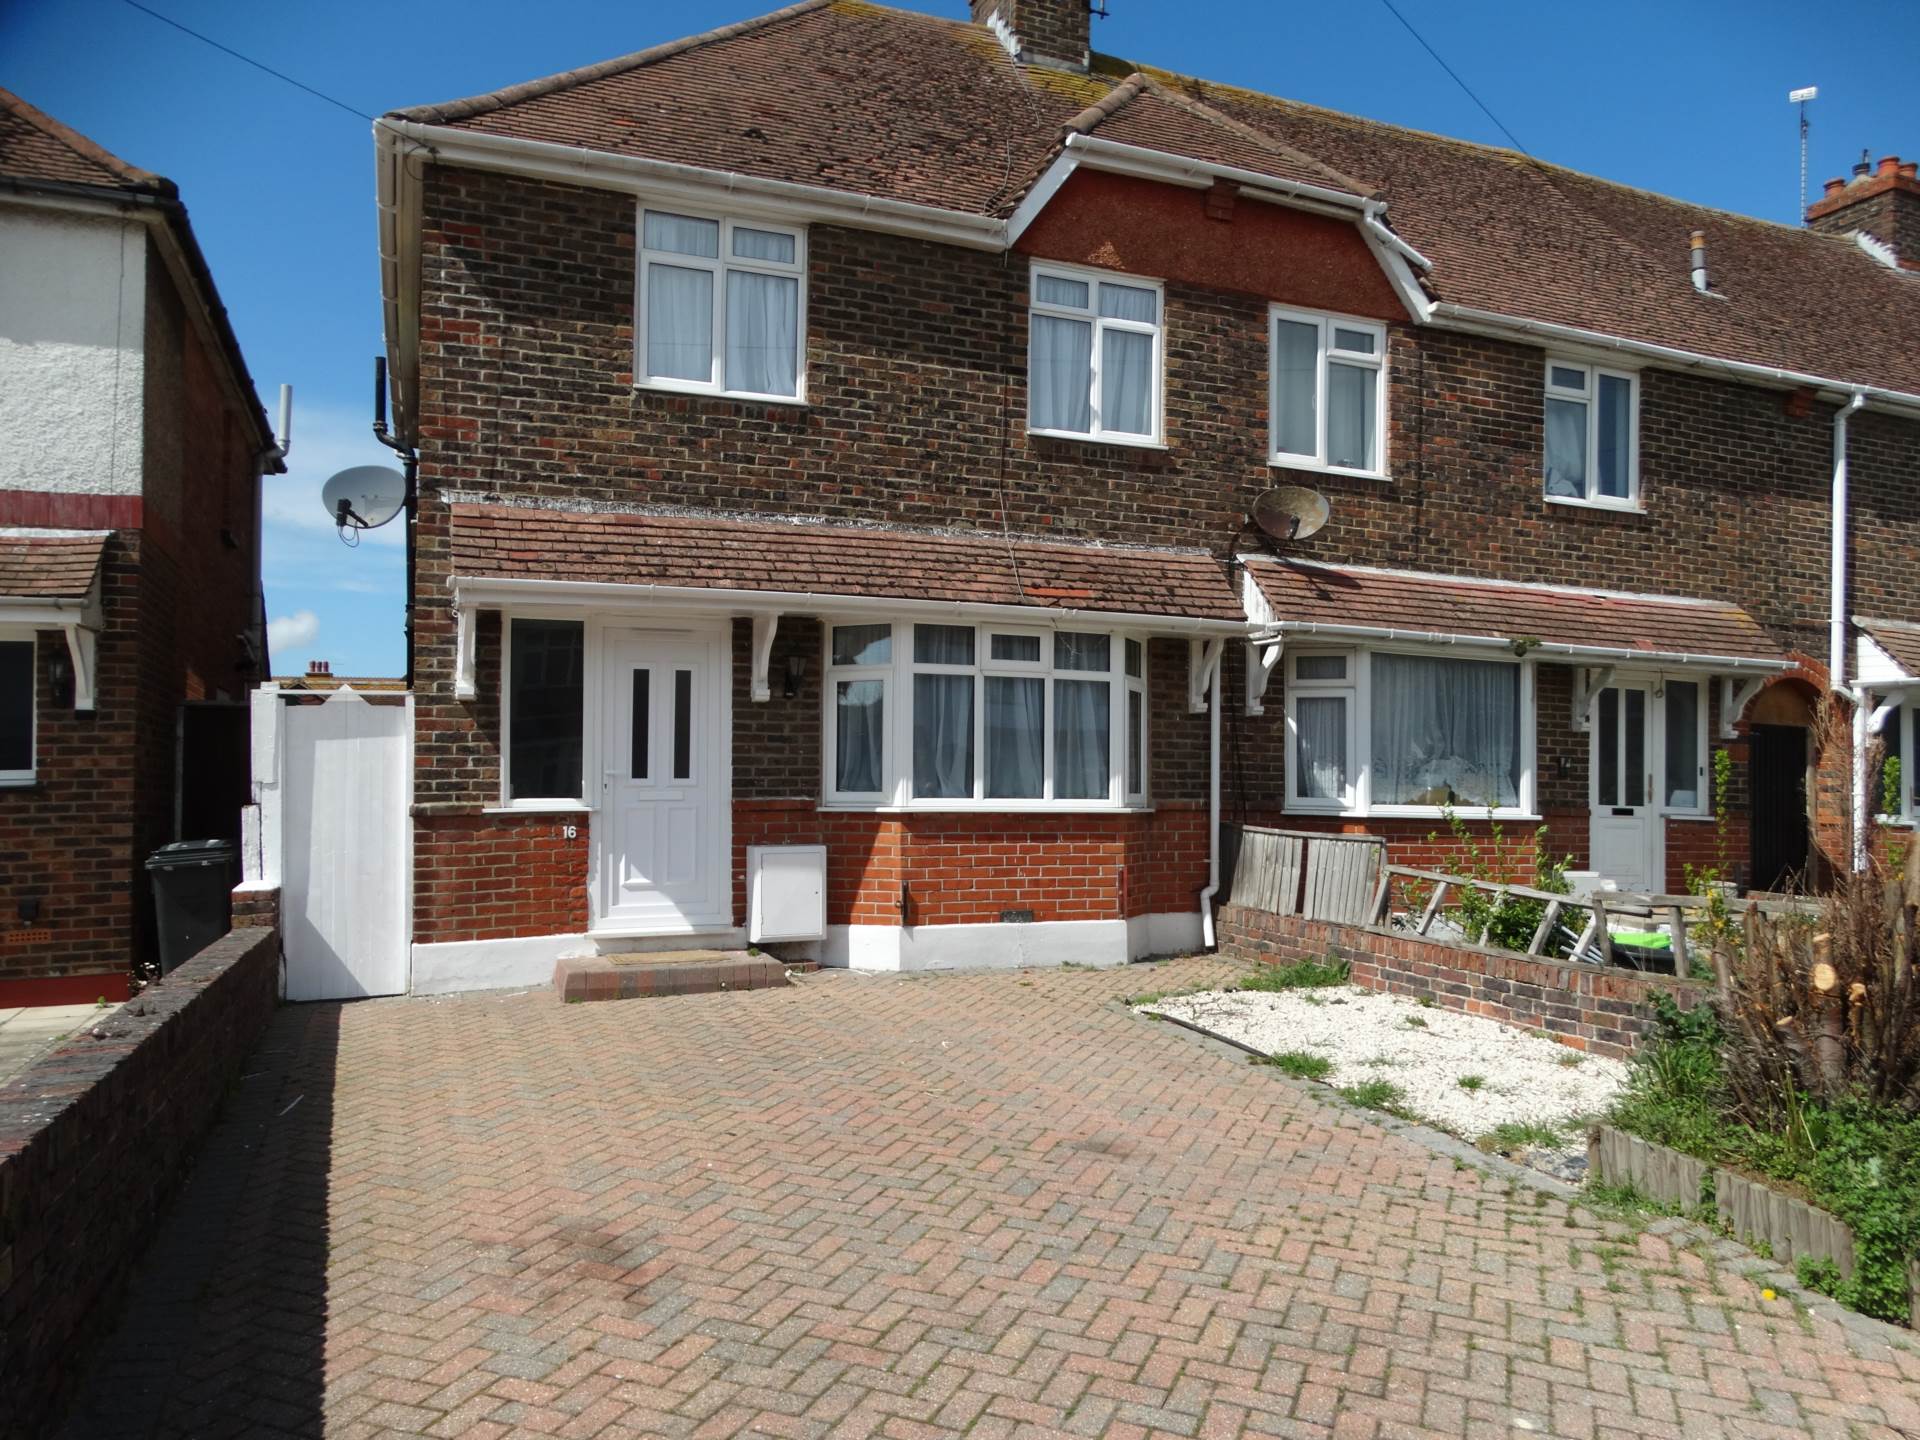 3 bed End Terraced House for rent in Crumbles. From Cavendish and Co - Eastbourne